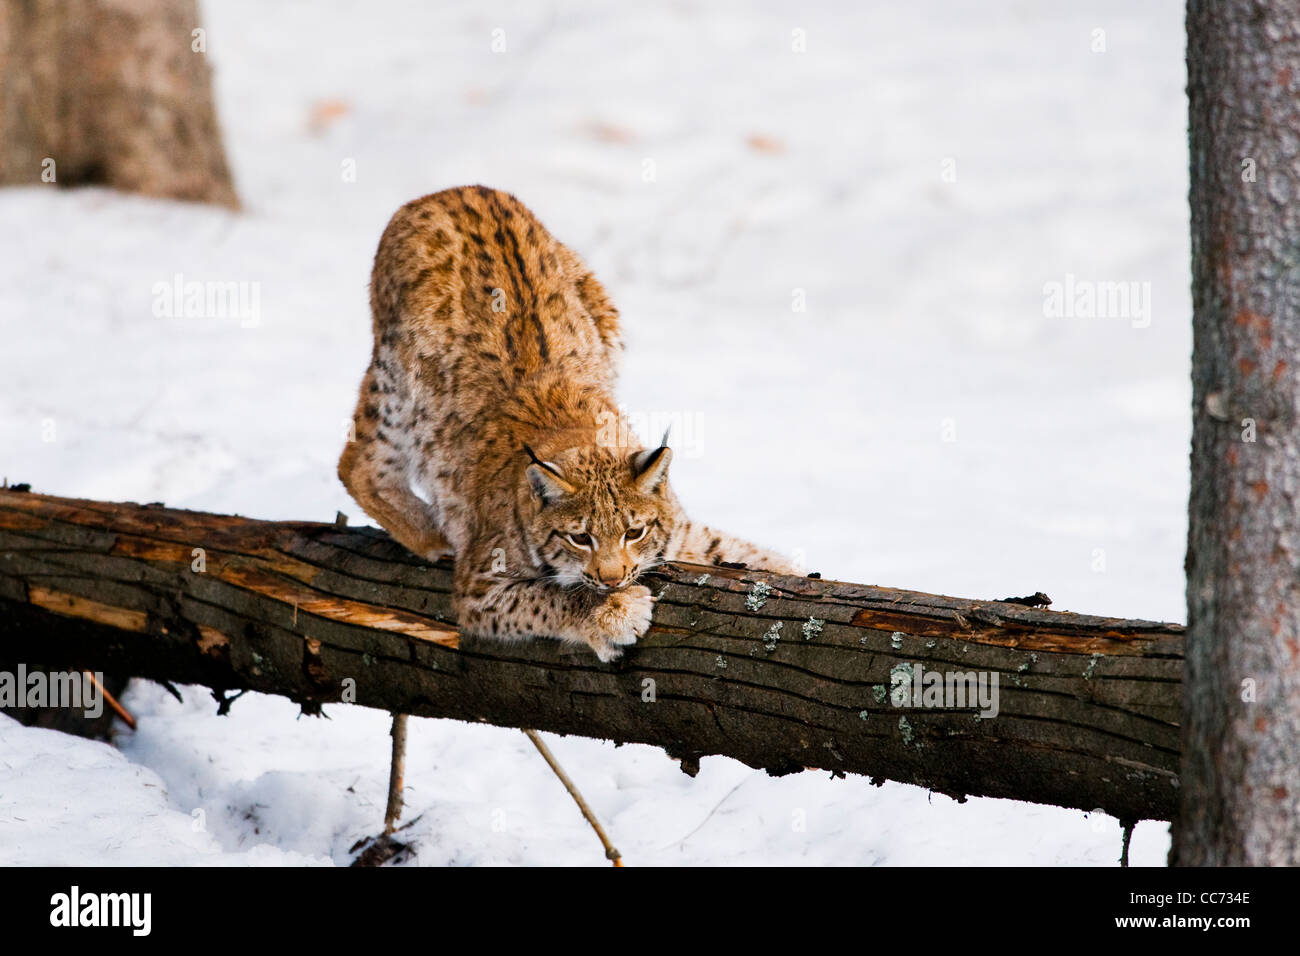 Eurasian lynx (Lynx lynx) sharpening claws on tree trunk in the snow in winter, Bavarian Forest, Germany Stock Photo